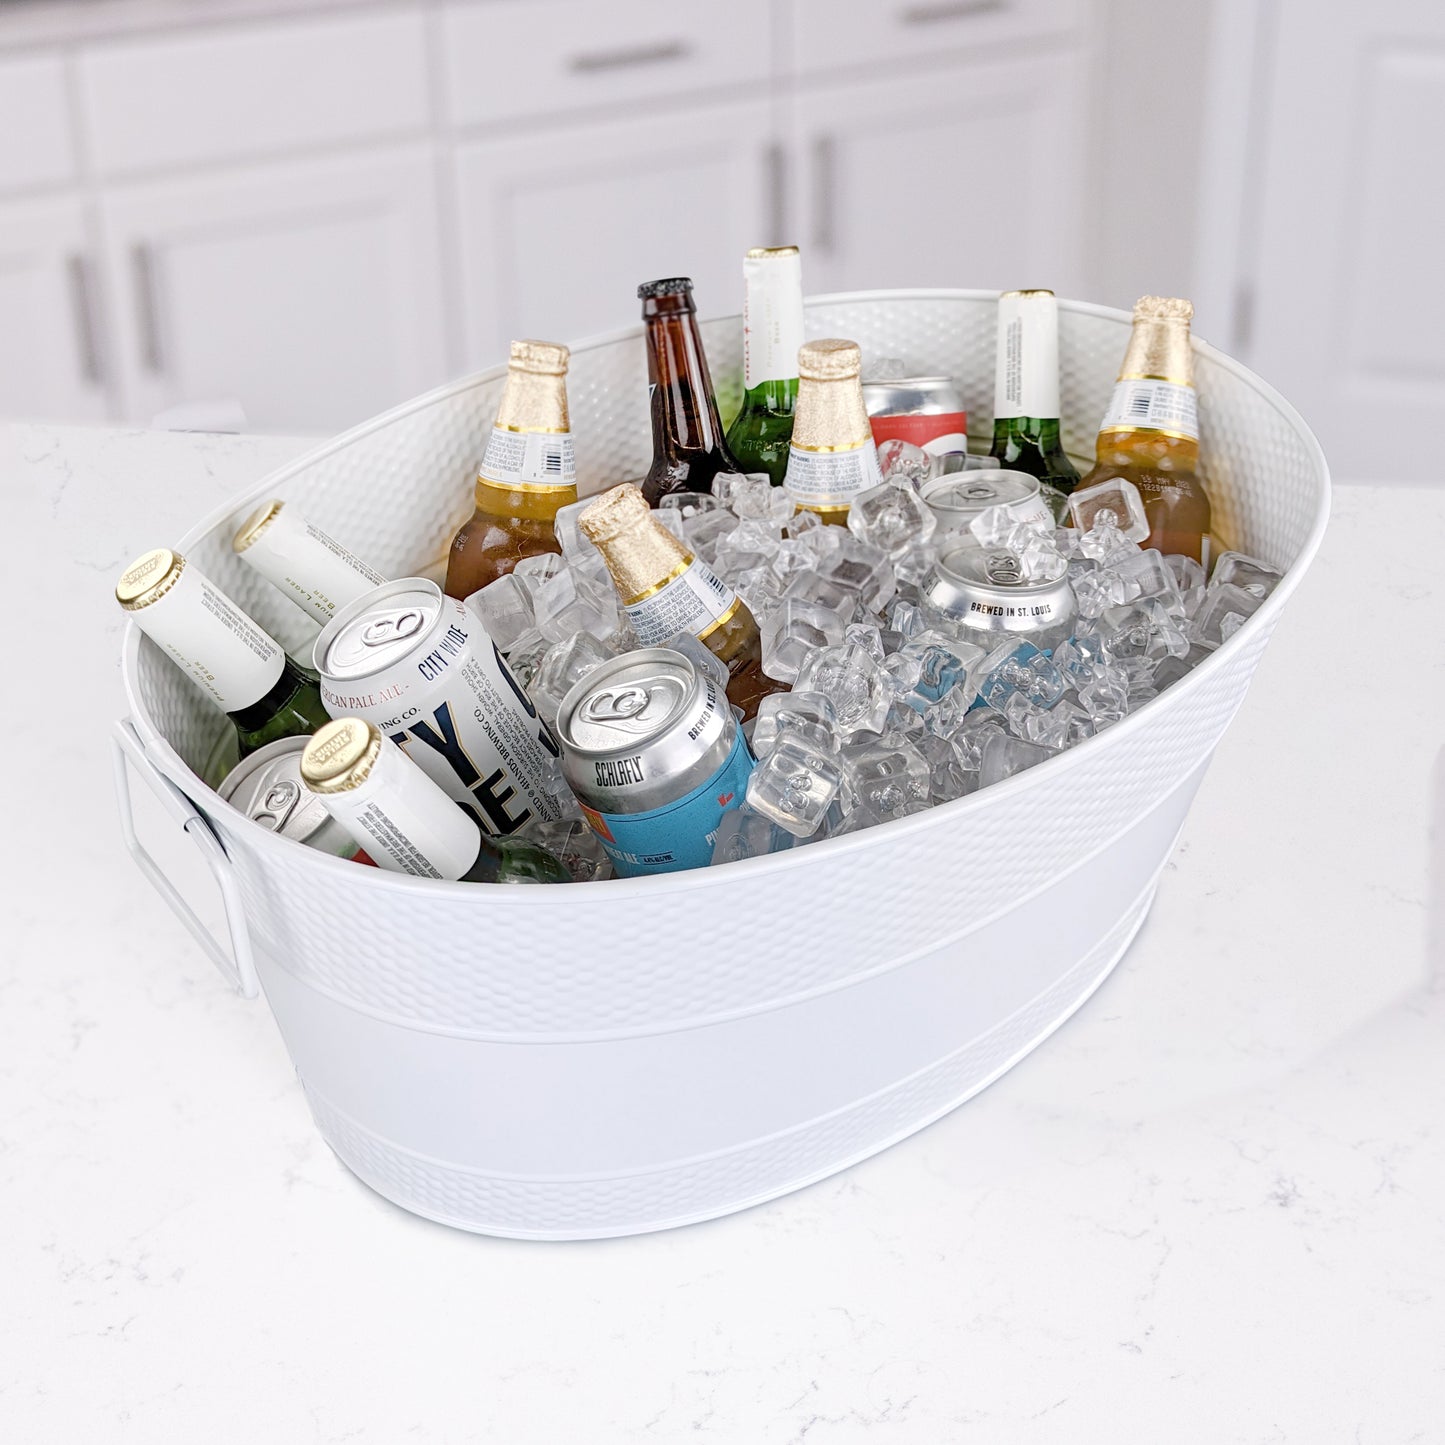 Oval metal party tub to chill drinks at a party with friends, celebrating a wedding, anniversary, bridal shower, or other holiday.  